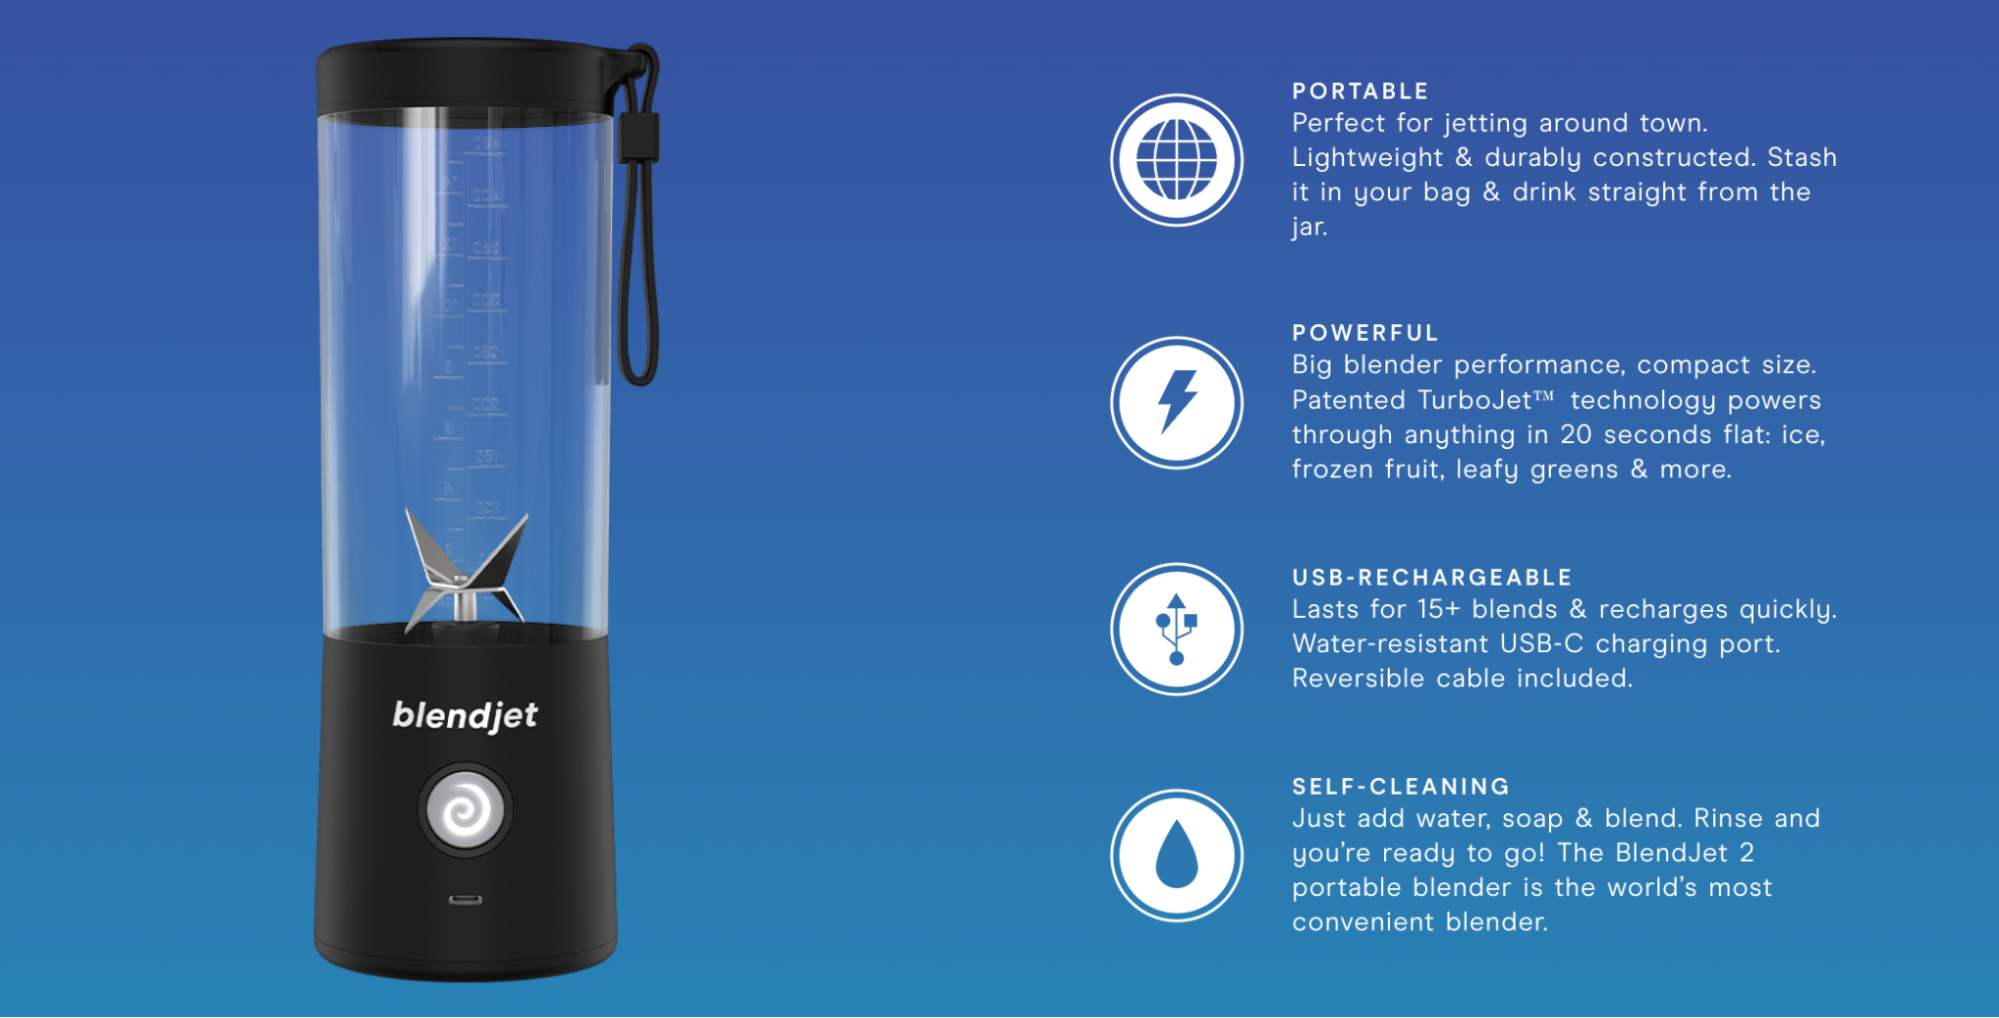 This screenshot from BlendJet's website showcases their black blender on the left, with text and icons on the right describing its functionality.